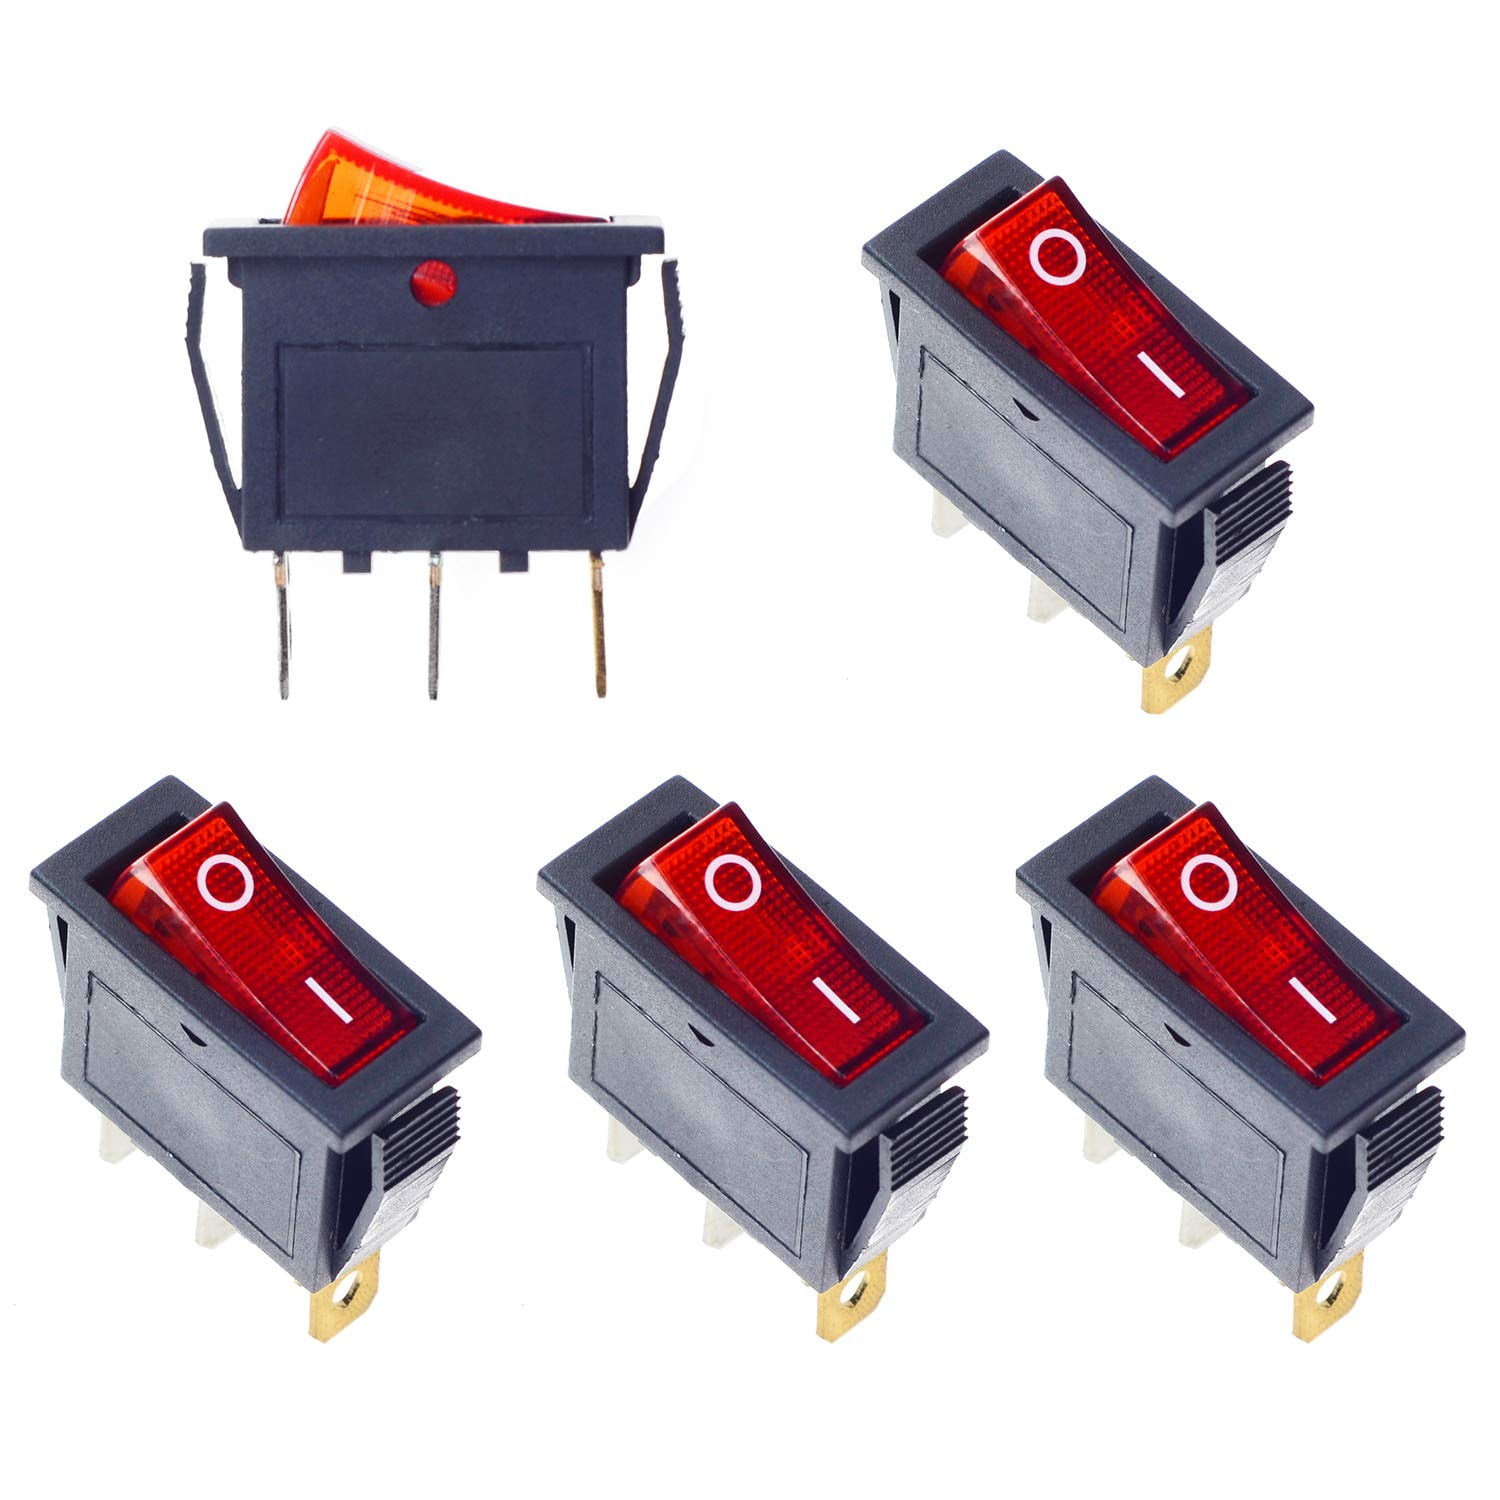 5Pcs Two Red Light Lamp 6Pins SPST ON/OFF Boat Rocker Switch W/ Waterproof cover